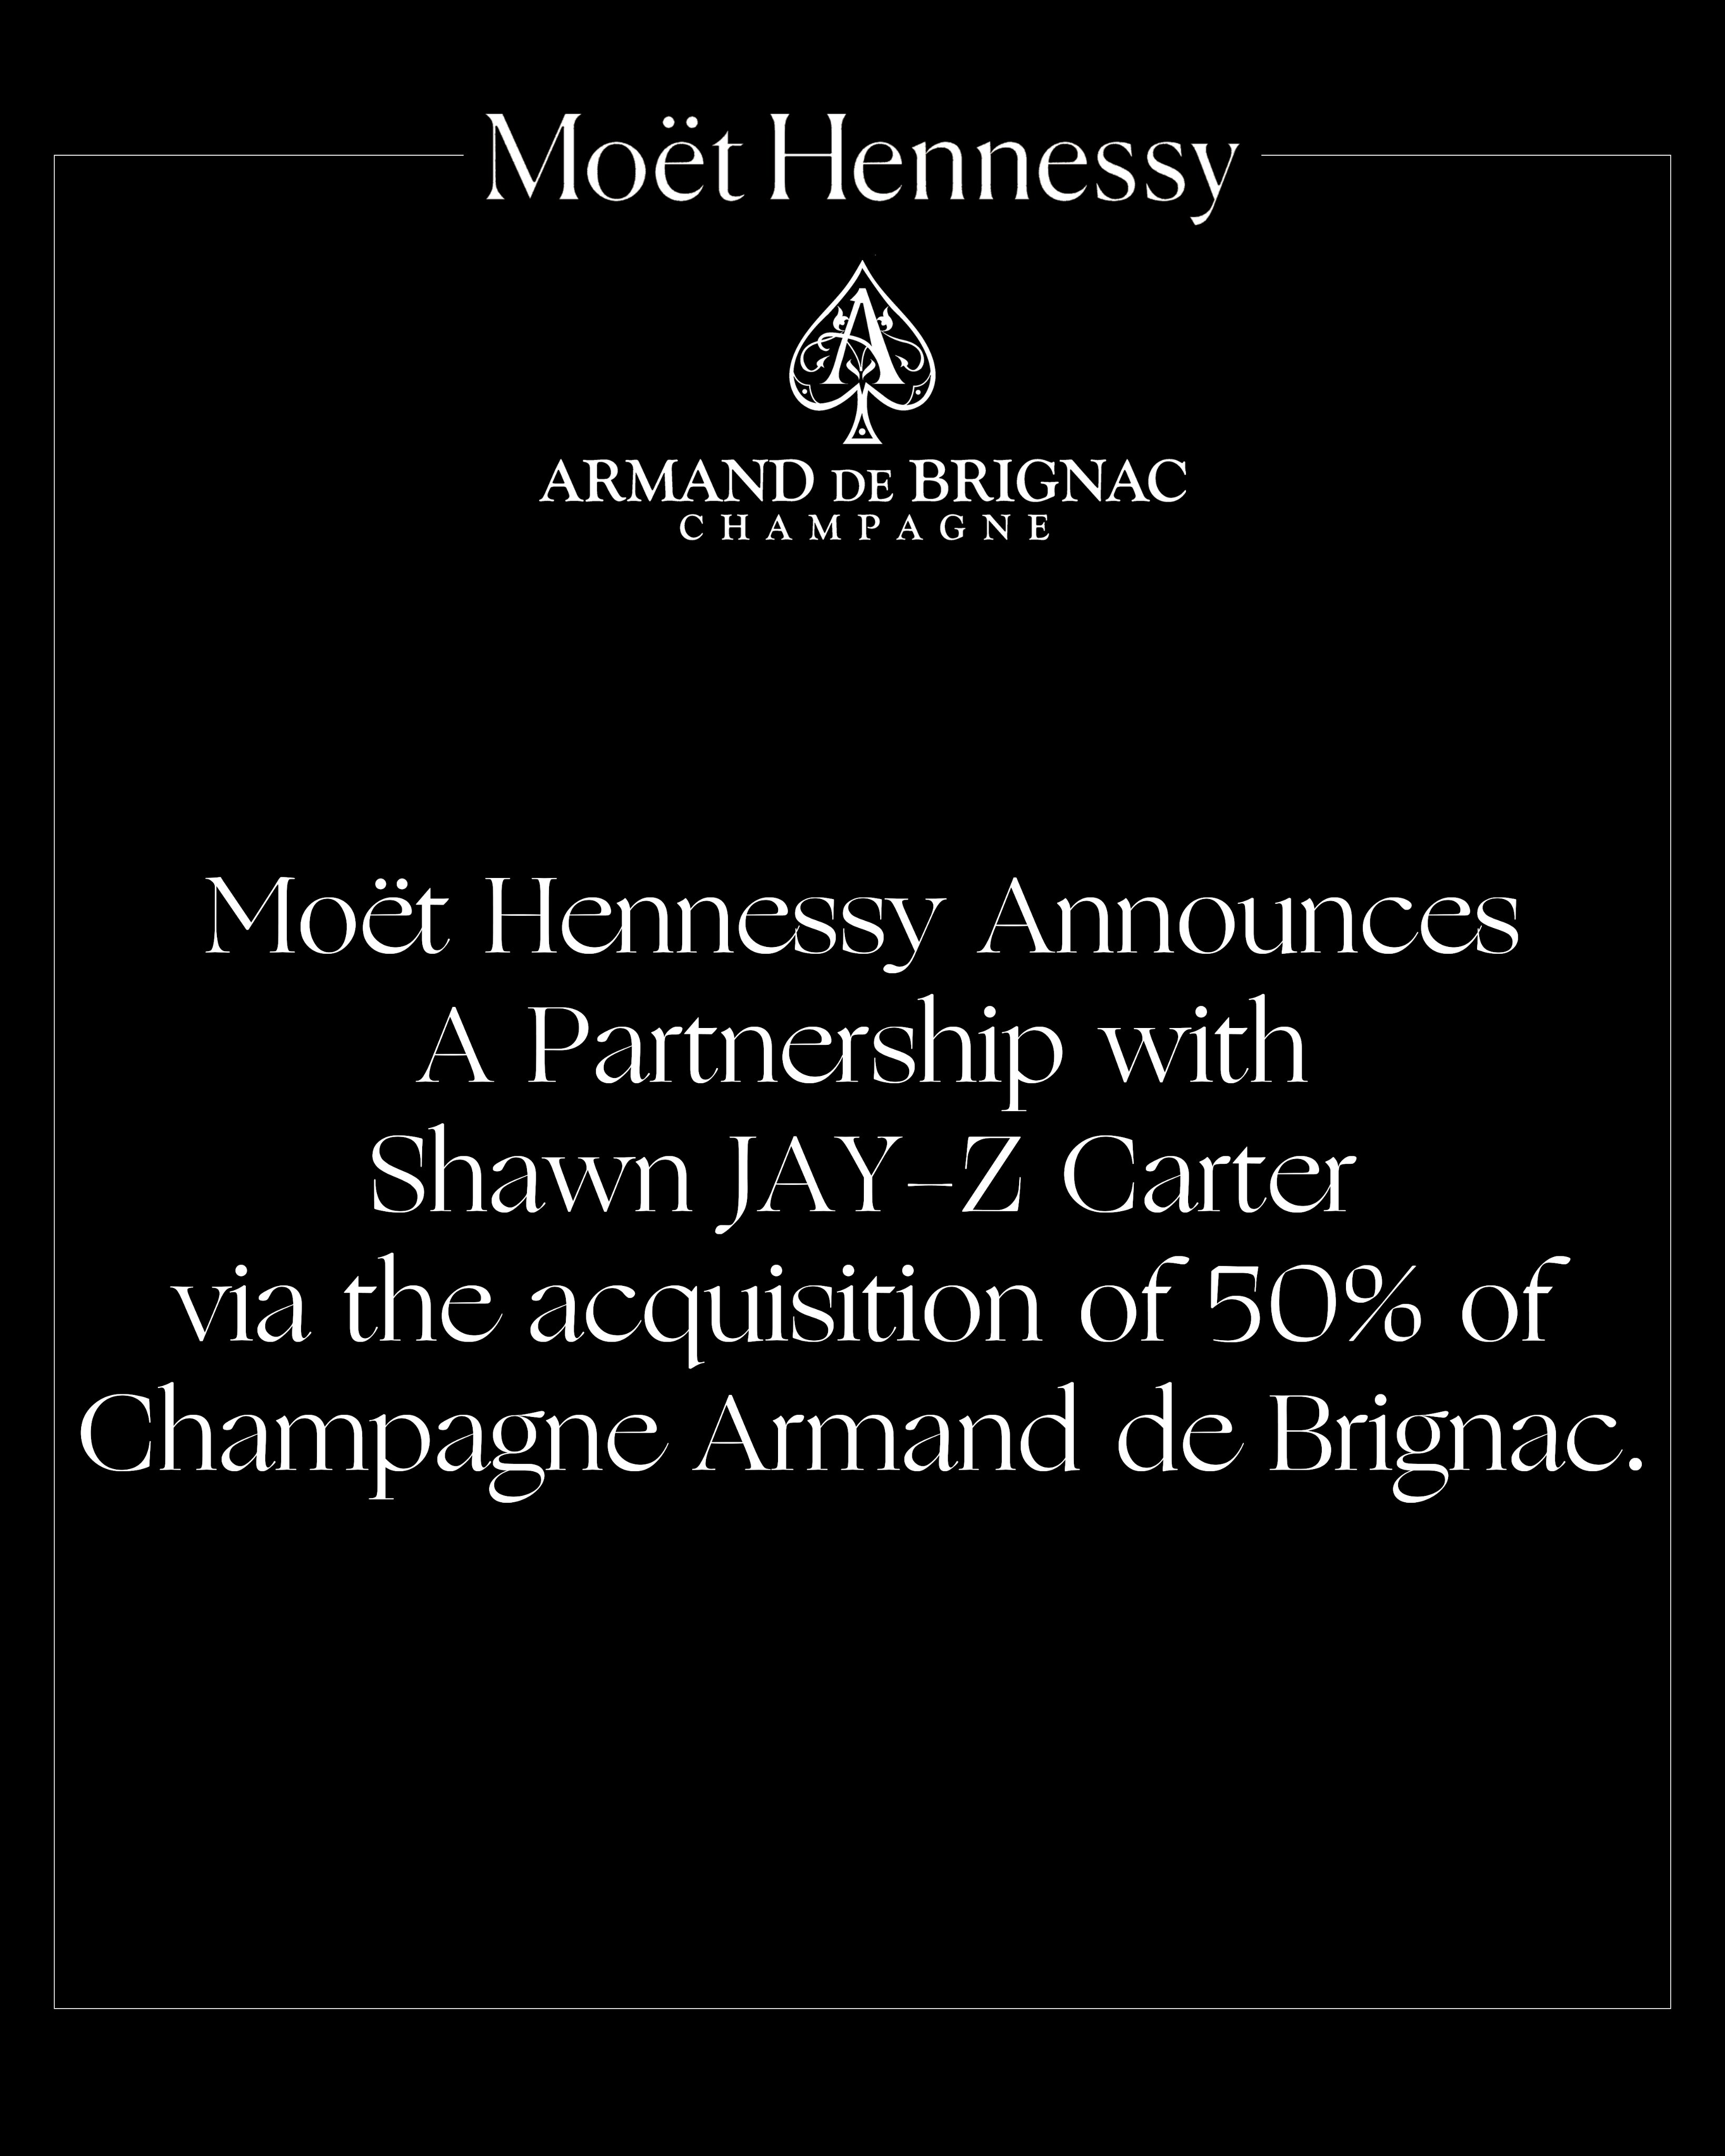 Jay-Z Champagne brand, Moet Hennessy launch partnership - Chicago